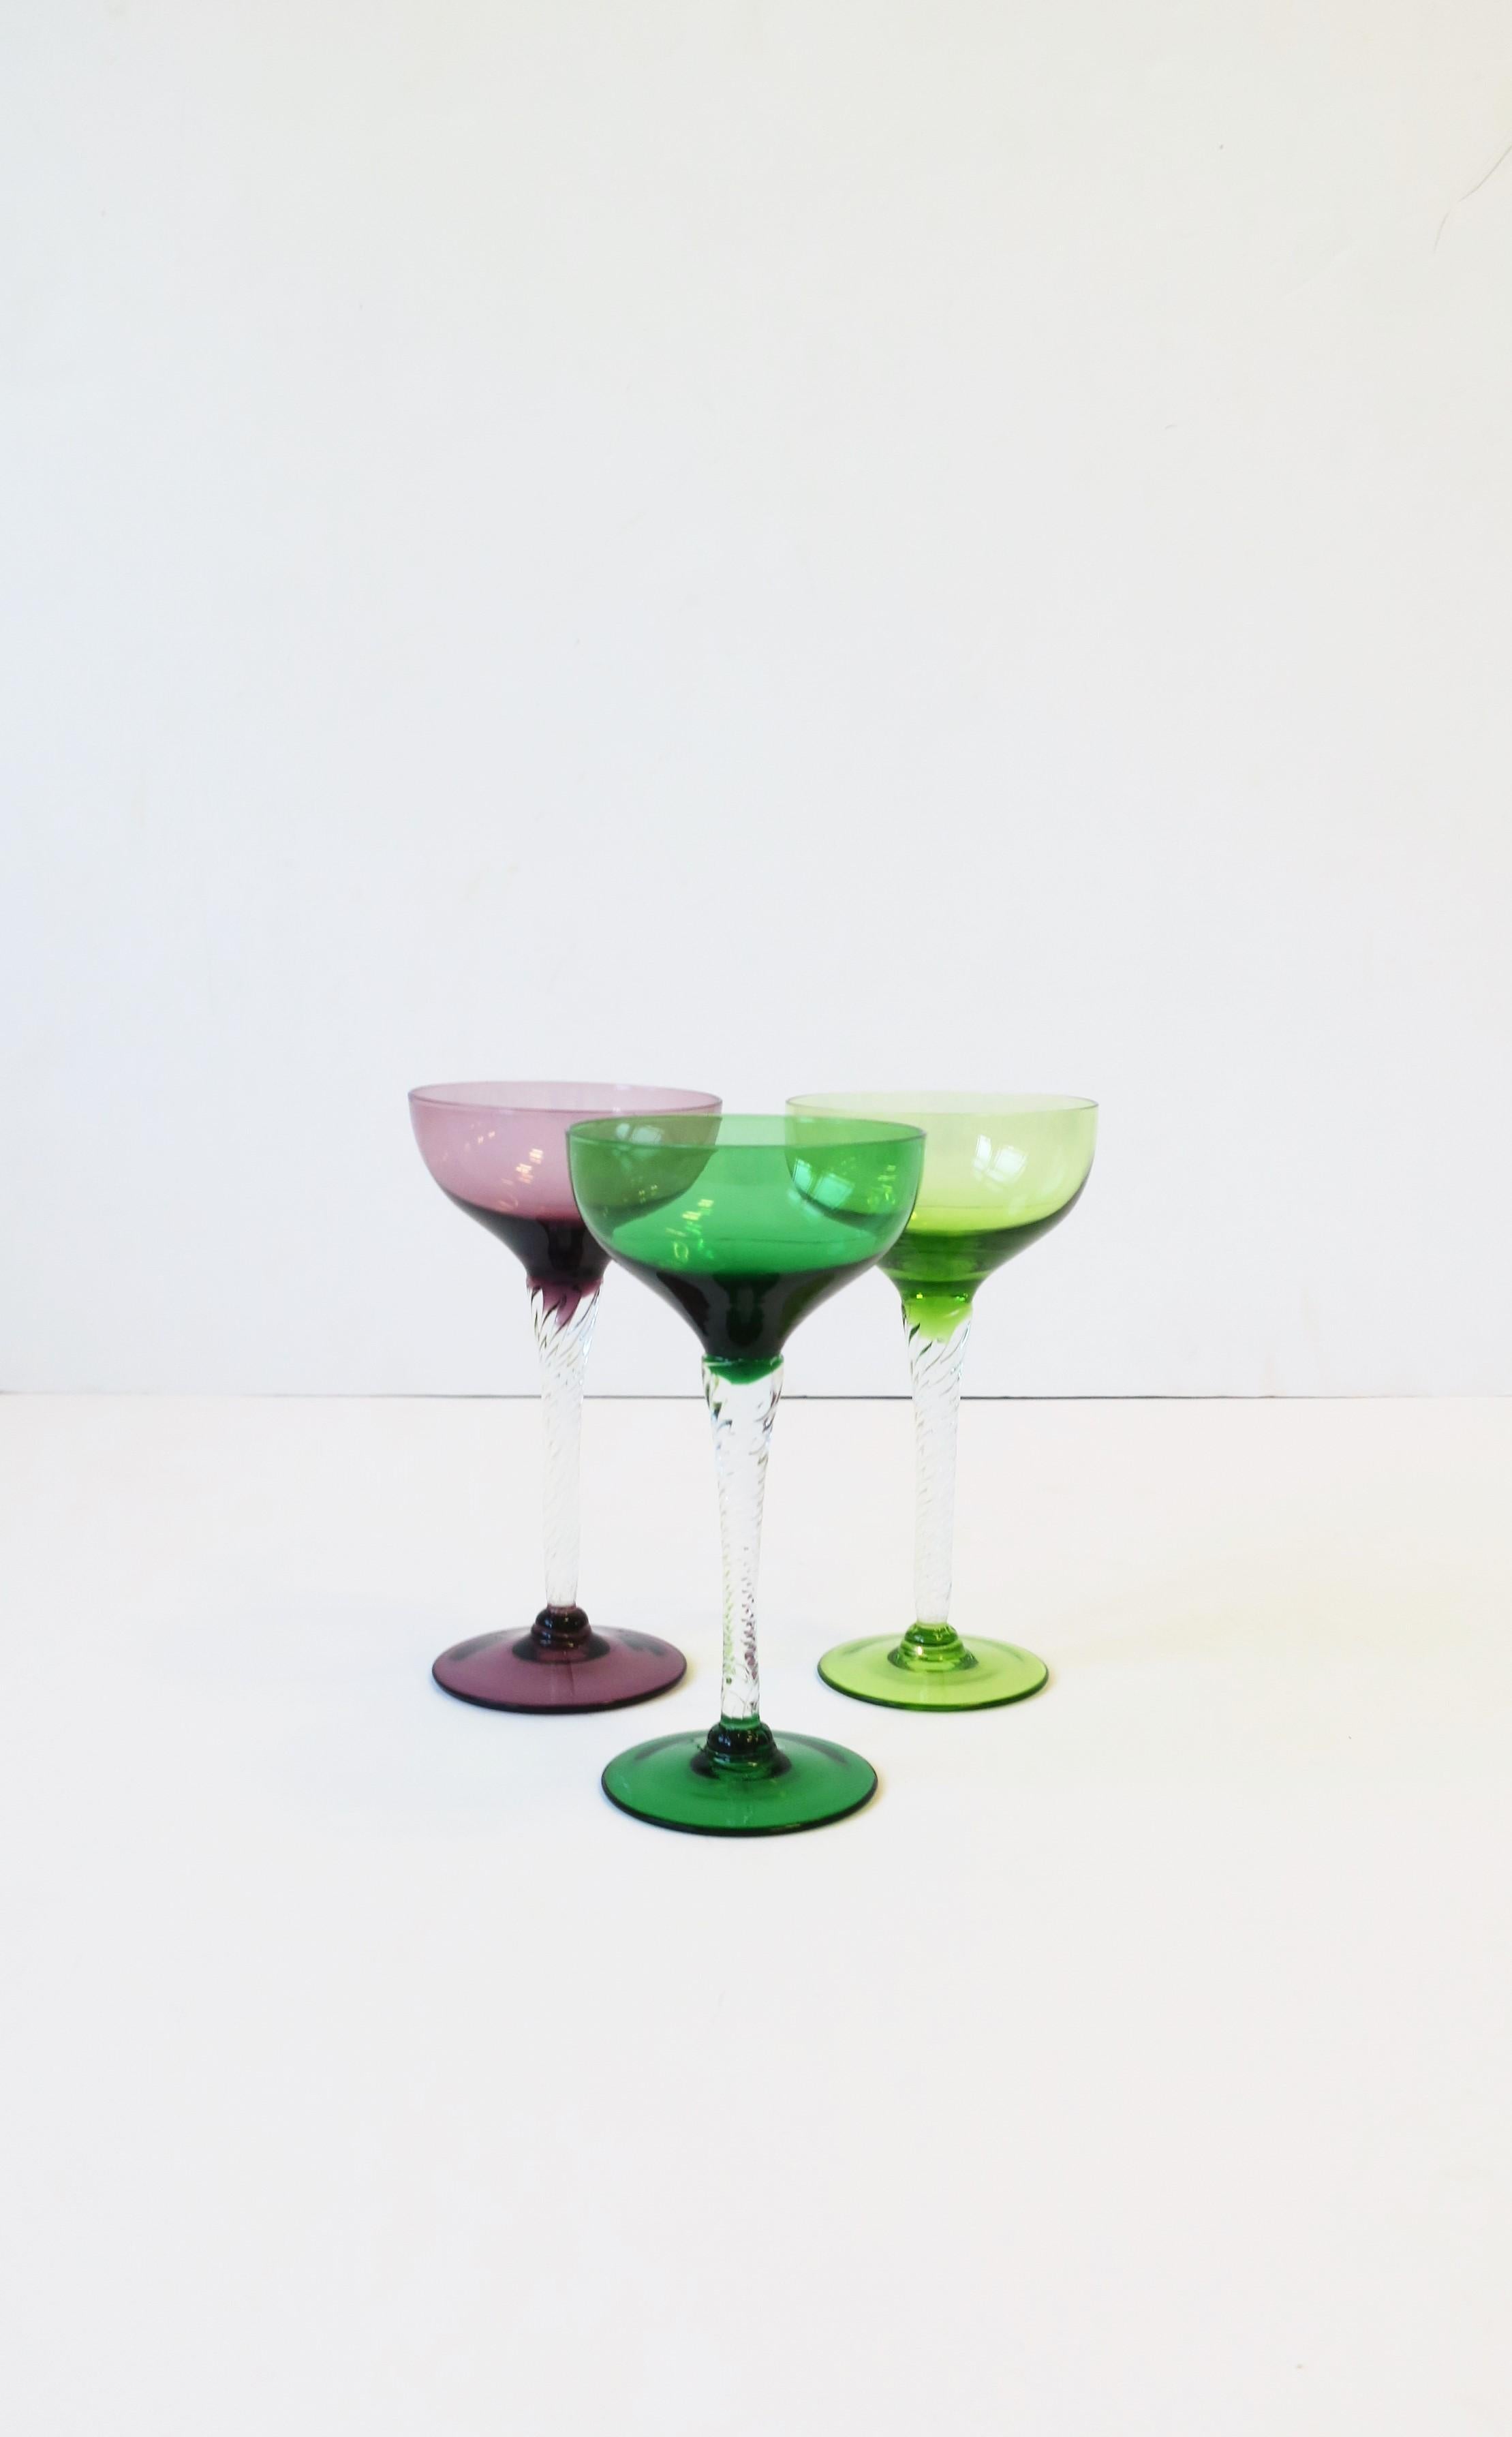 A beautiful set of three (3) vintage blown glass art glass cocktail or Champagne coupe glasses in Emerald green, chartreuse green and purple/aubergine with a transparent twisted stem, circa late-20th century, Europe, possibly Italy. A great set for